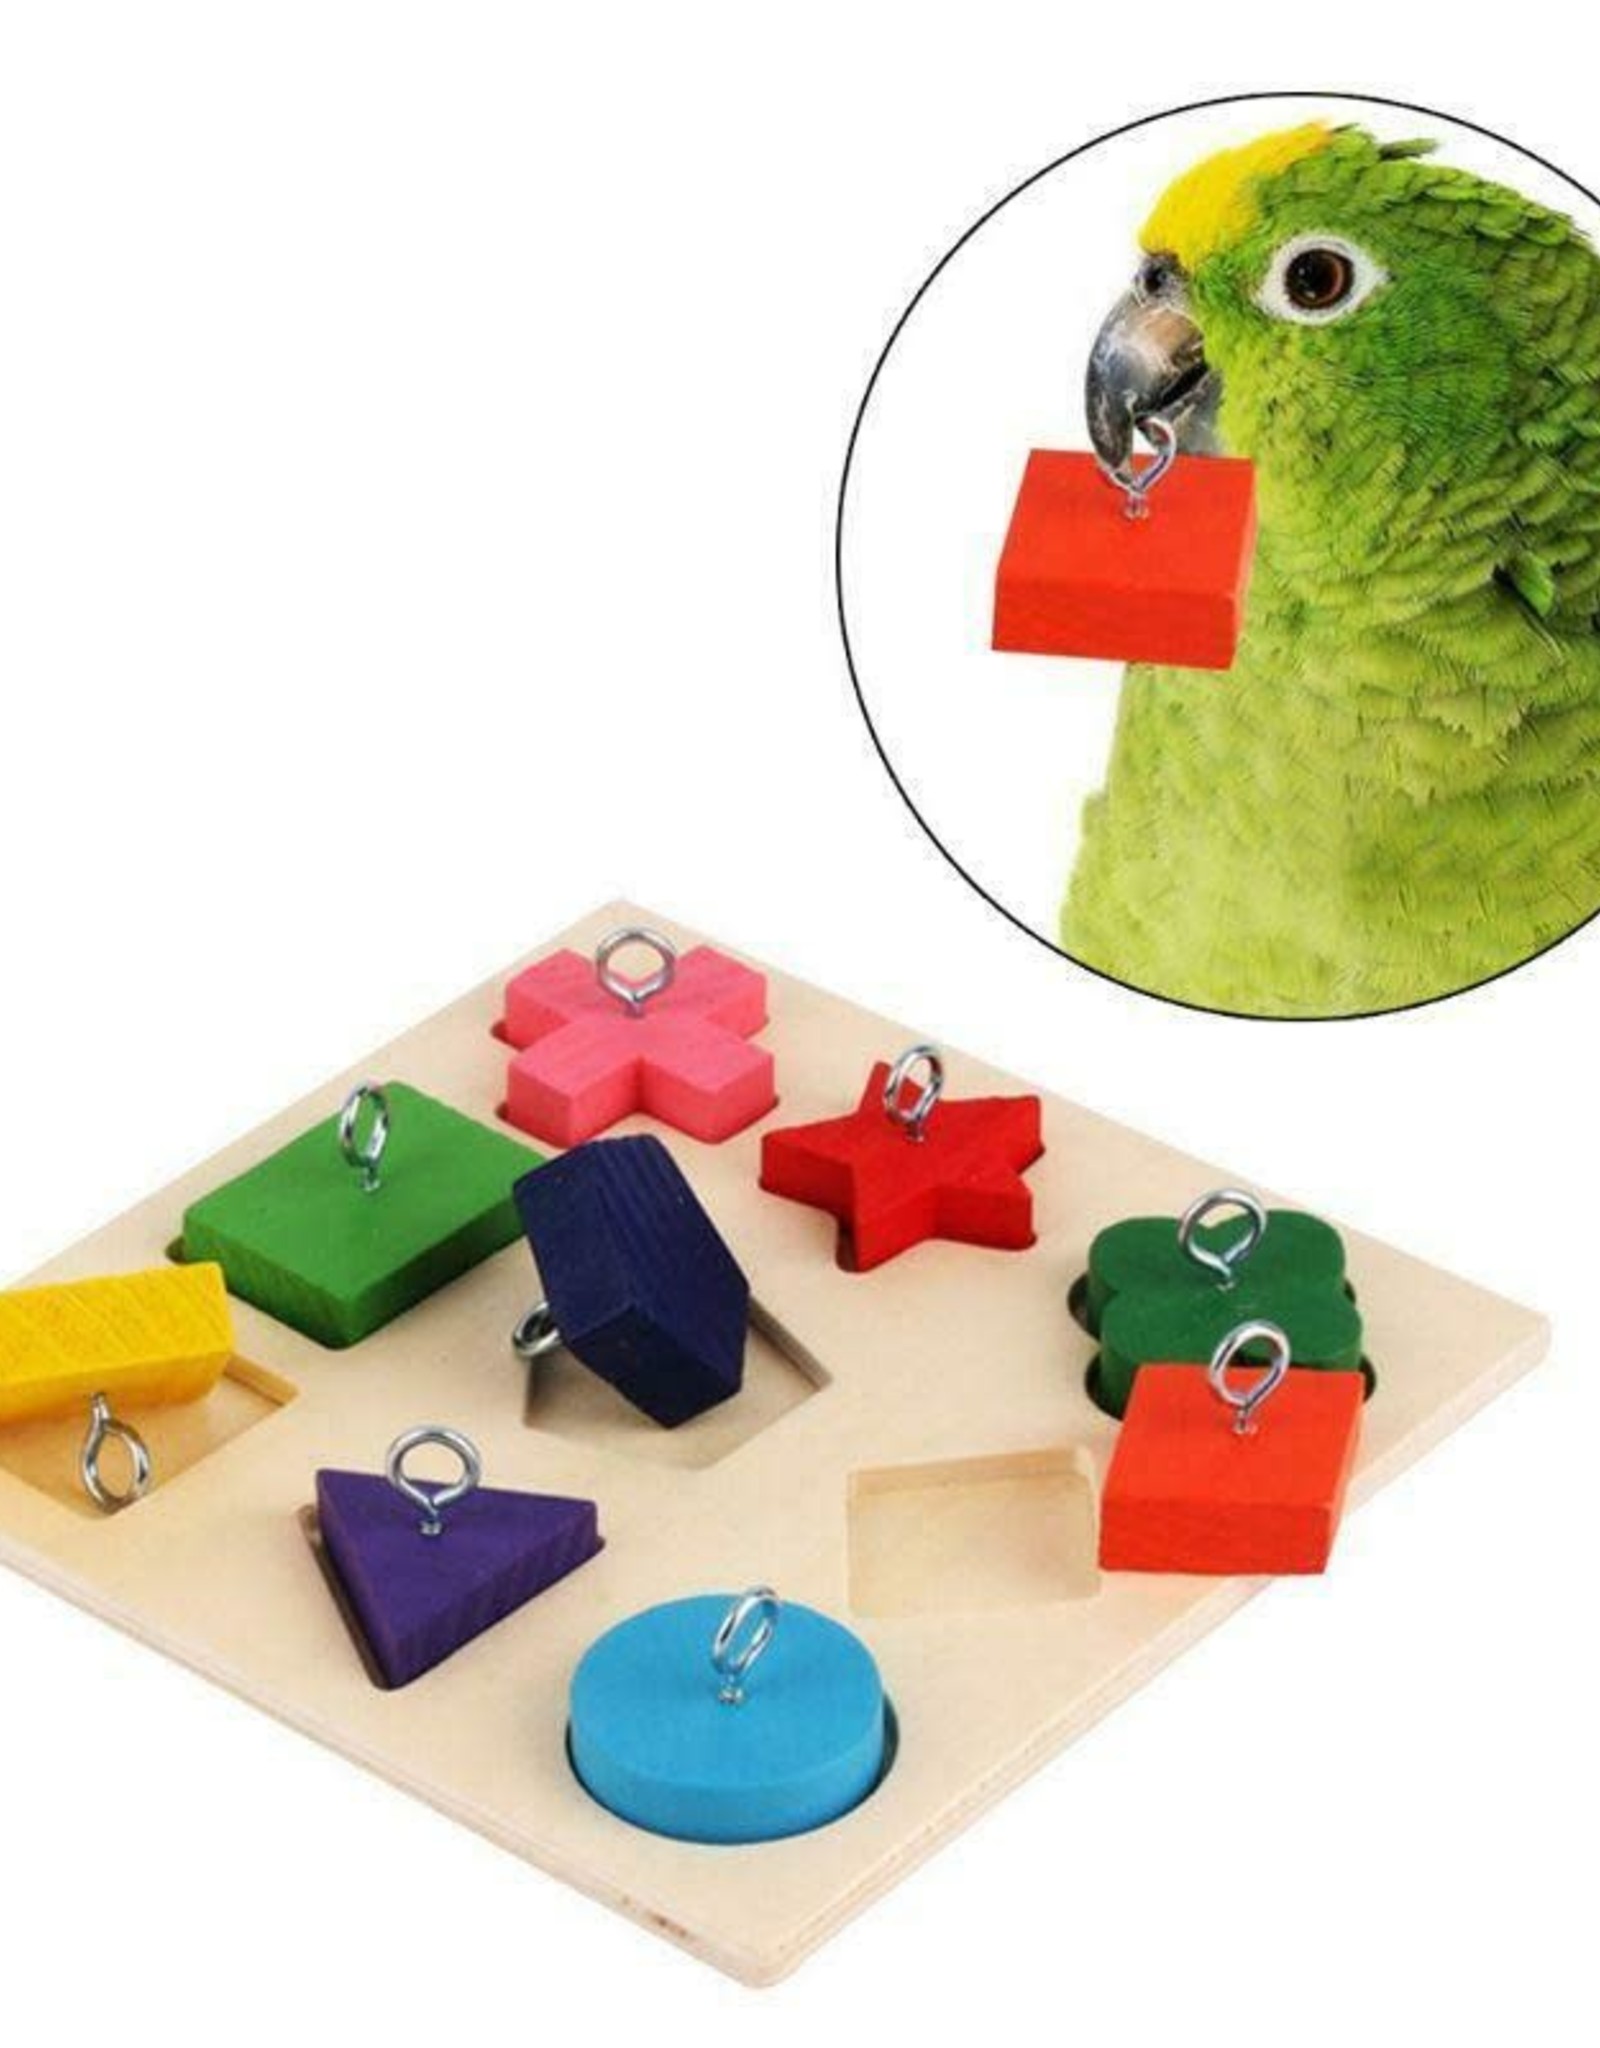 CLICKER TRAINING- WOODEN SQUARE- PUZZLE TOY- 6X6X1